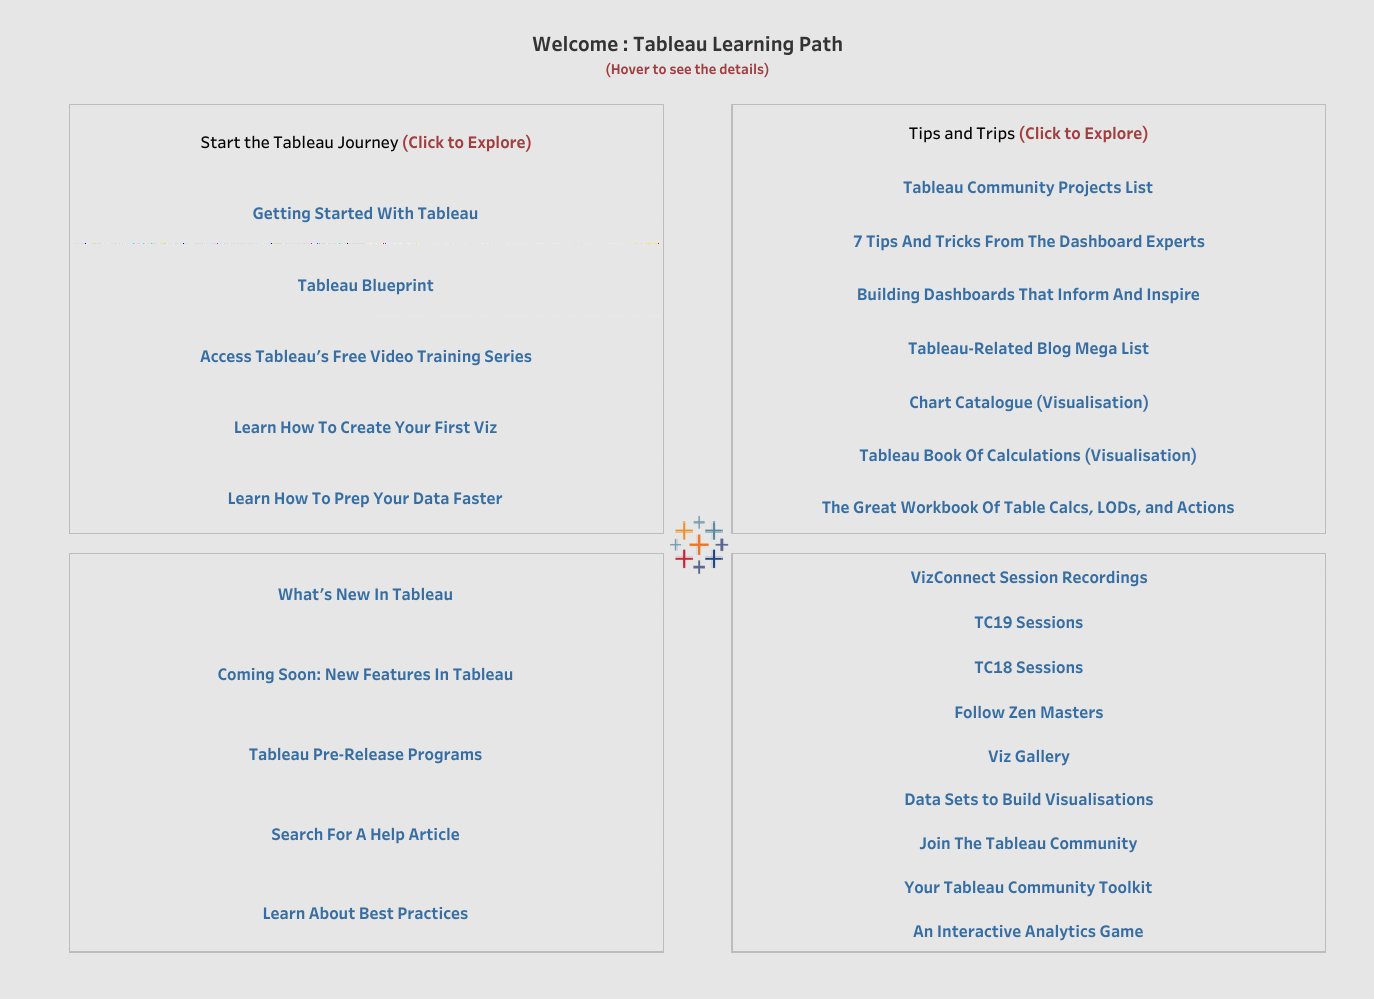 advice Unavoidable headache Sagar Kapoor on Twitter: "Tableau Learning Path is a consolidation of all  the amazing Tableau Resources shared by Tableau and our Community for free.  @AdamMico1 @VizWizBI @FlerlageKev @flerlagekr @thoang1000 @tableau  @yam_caroline @mdivya516 @